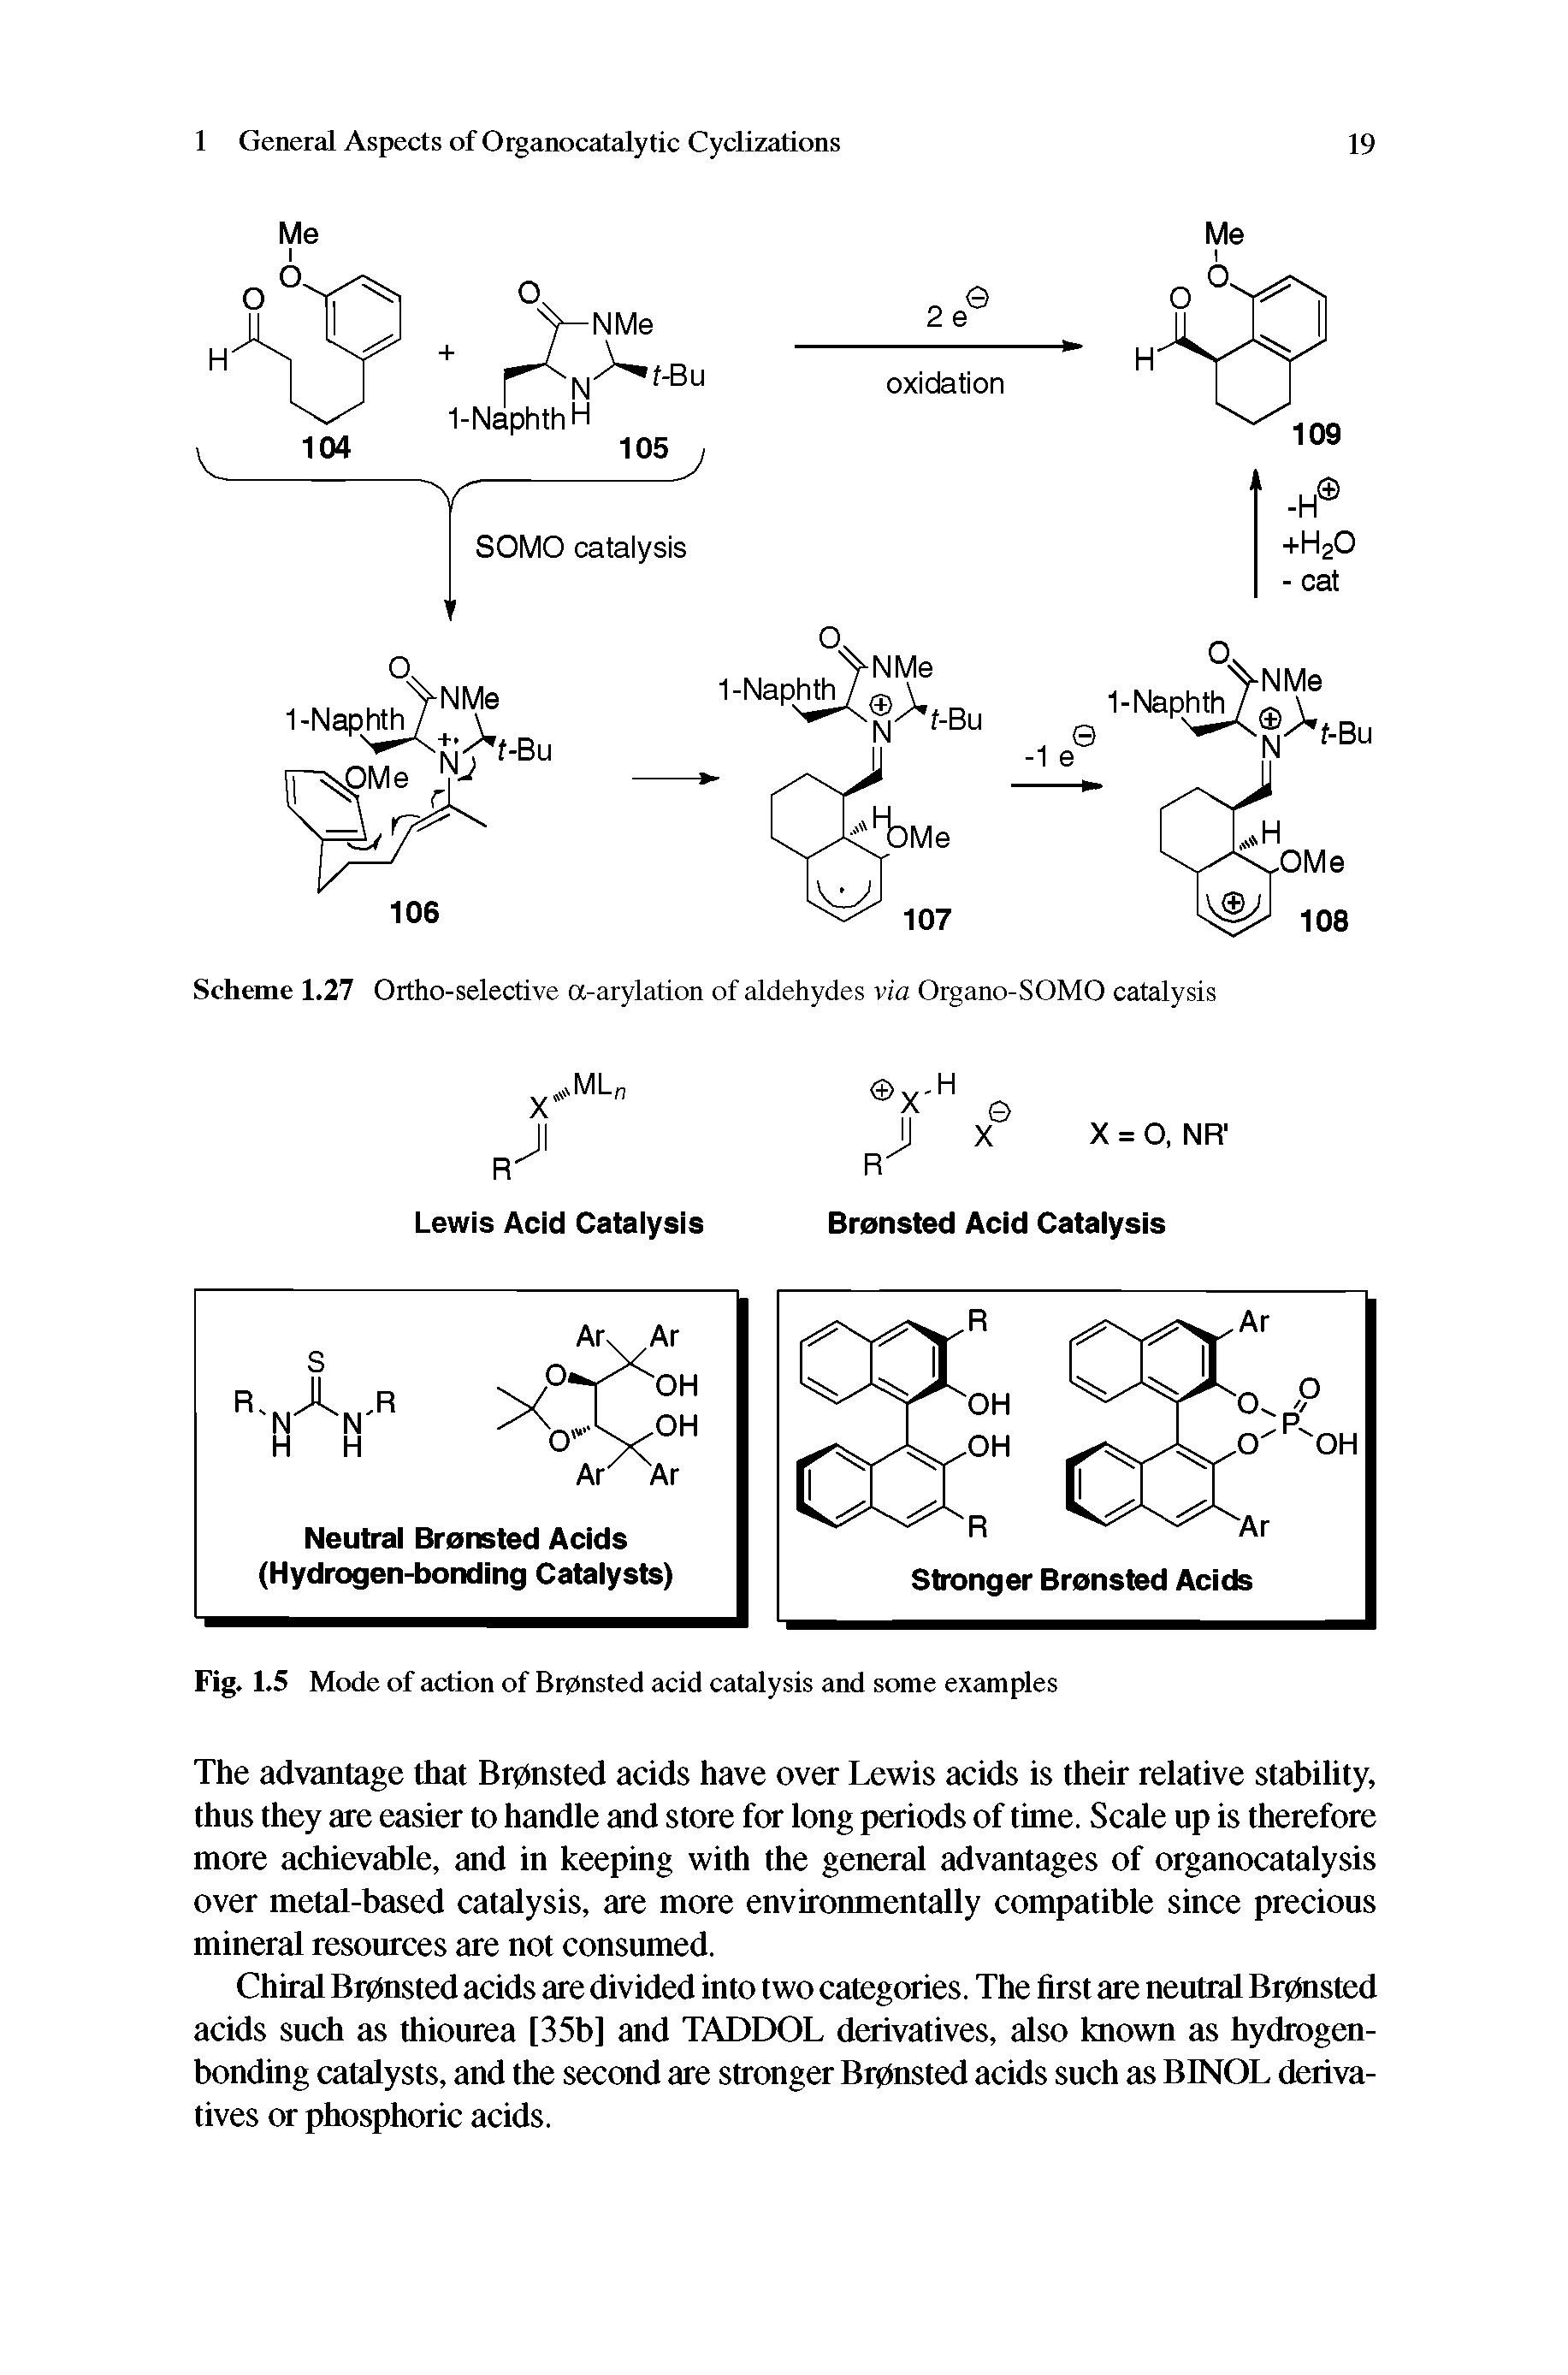 Fig. 1.5 Mode of action of Brpnsted acid catalysis and some examples...